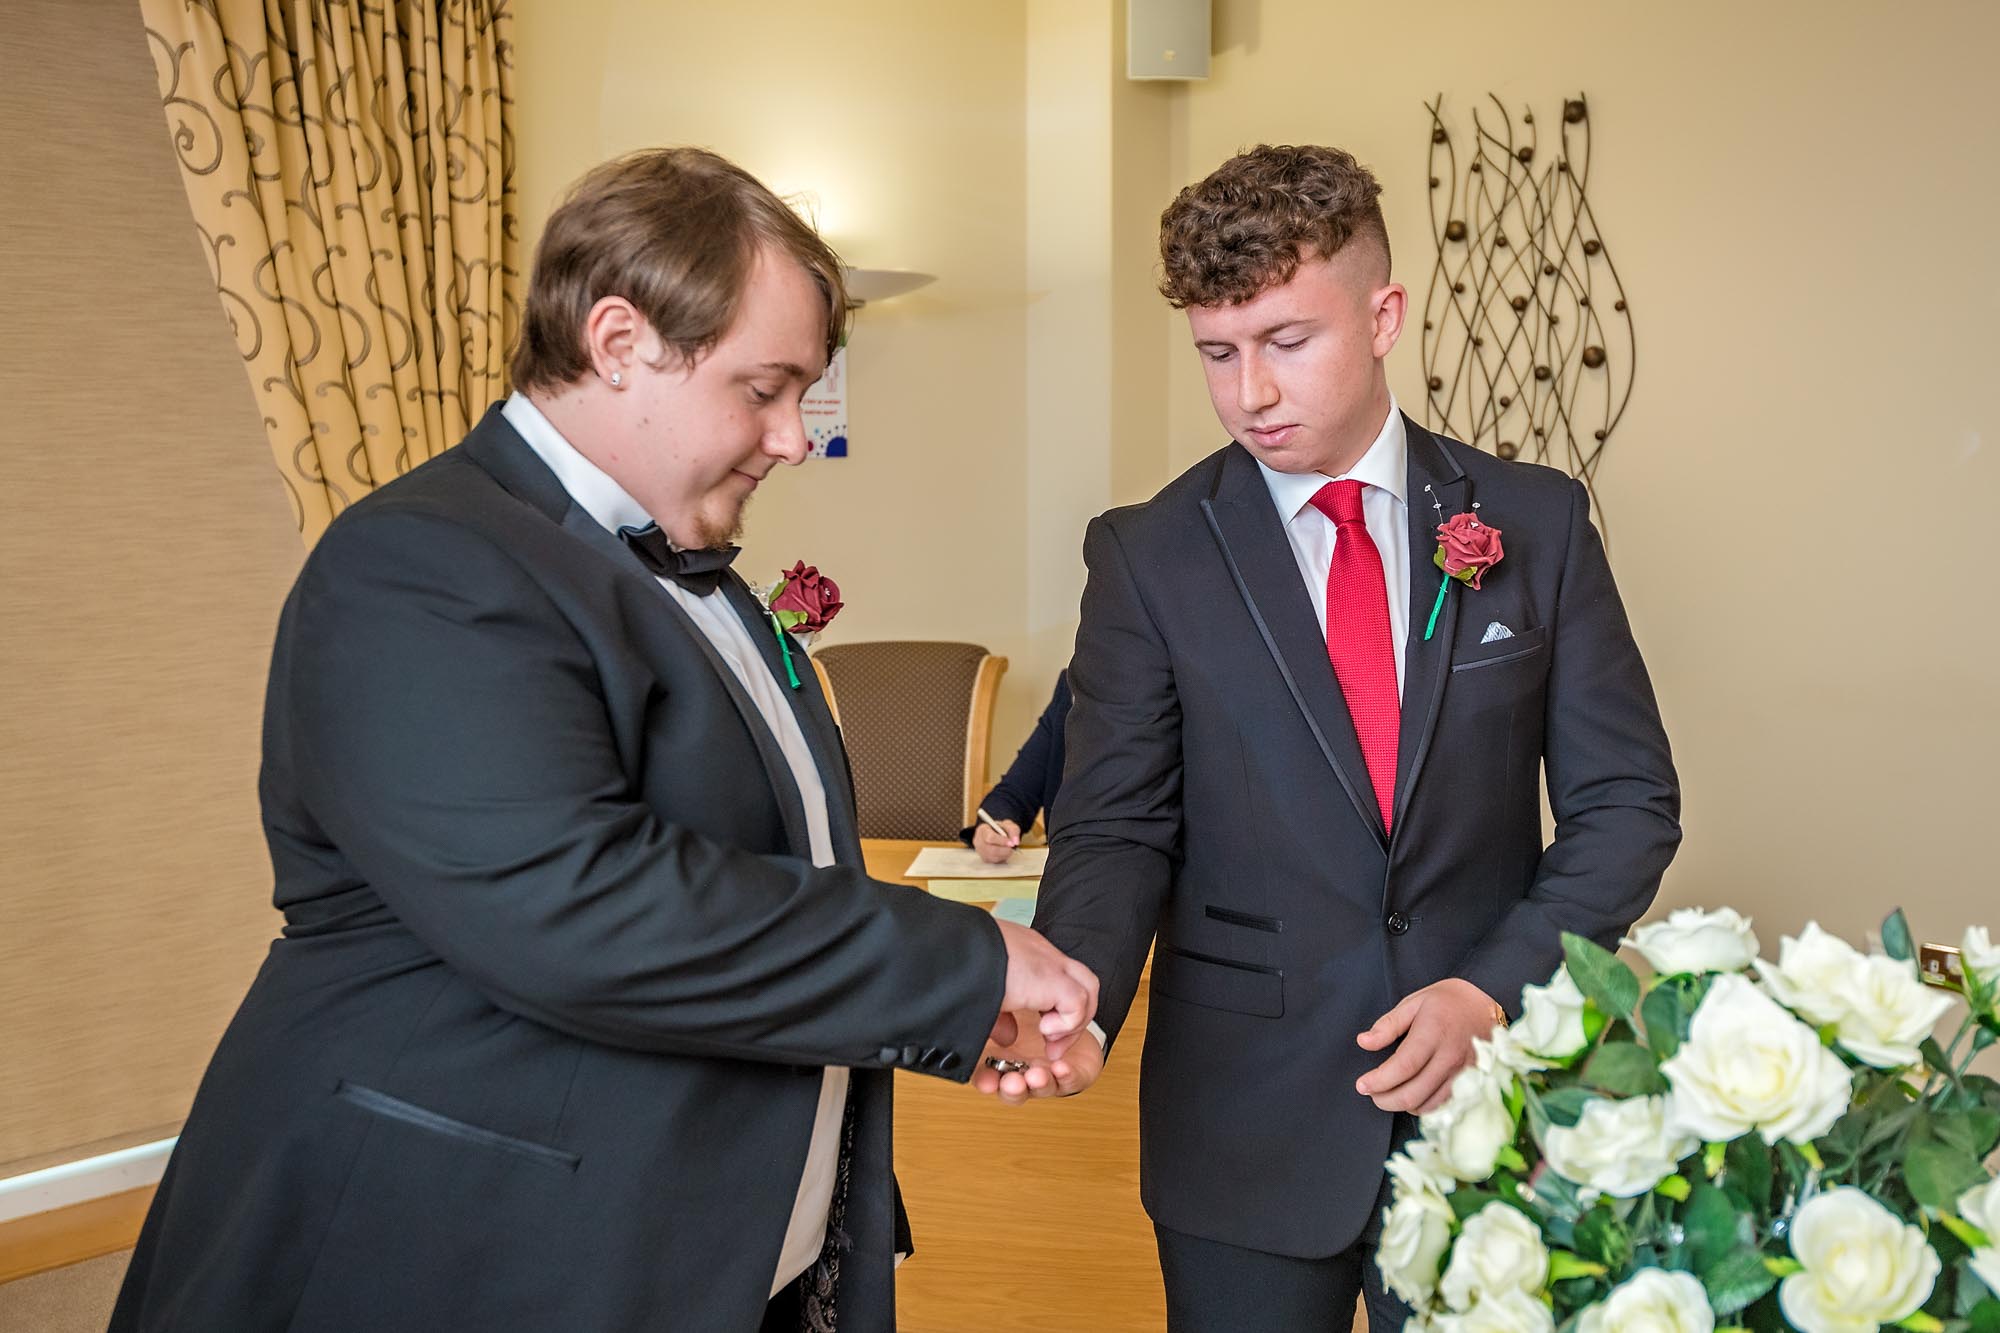 The best man presents the groom with his wedding ring in Penallta House